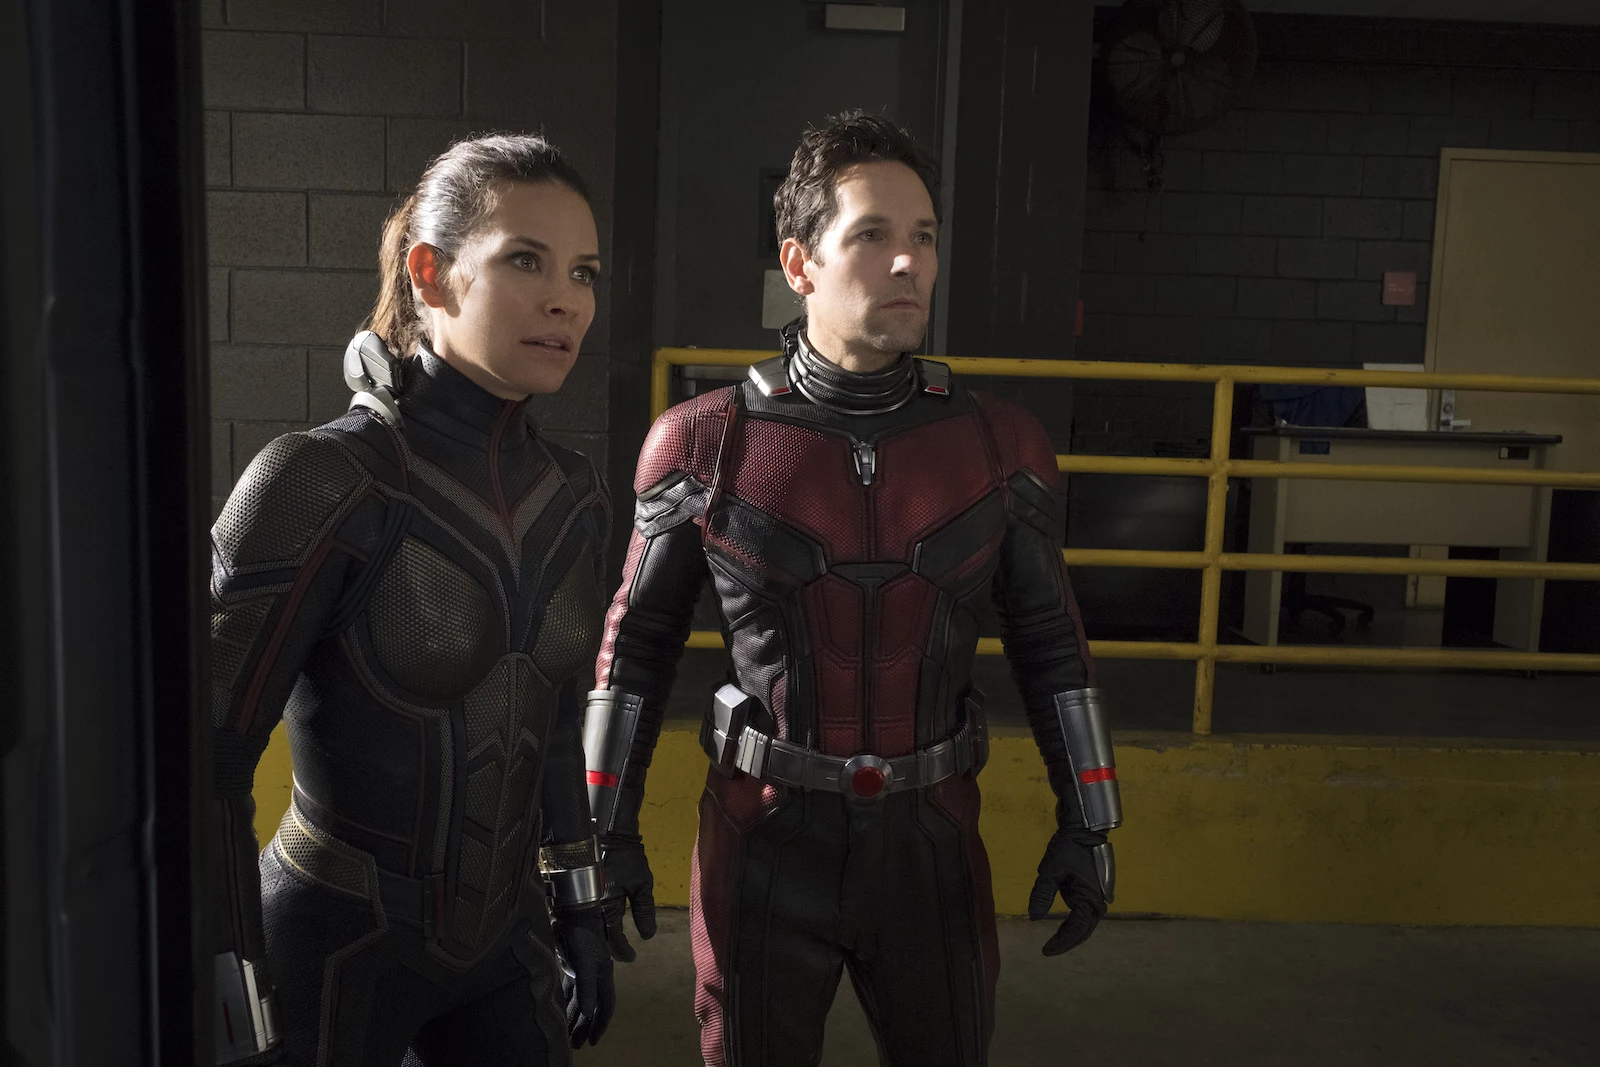 Evangeline Lilly Says Her Kids Think She's 'Cool' for Playing The Wasp